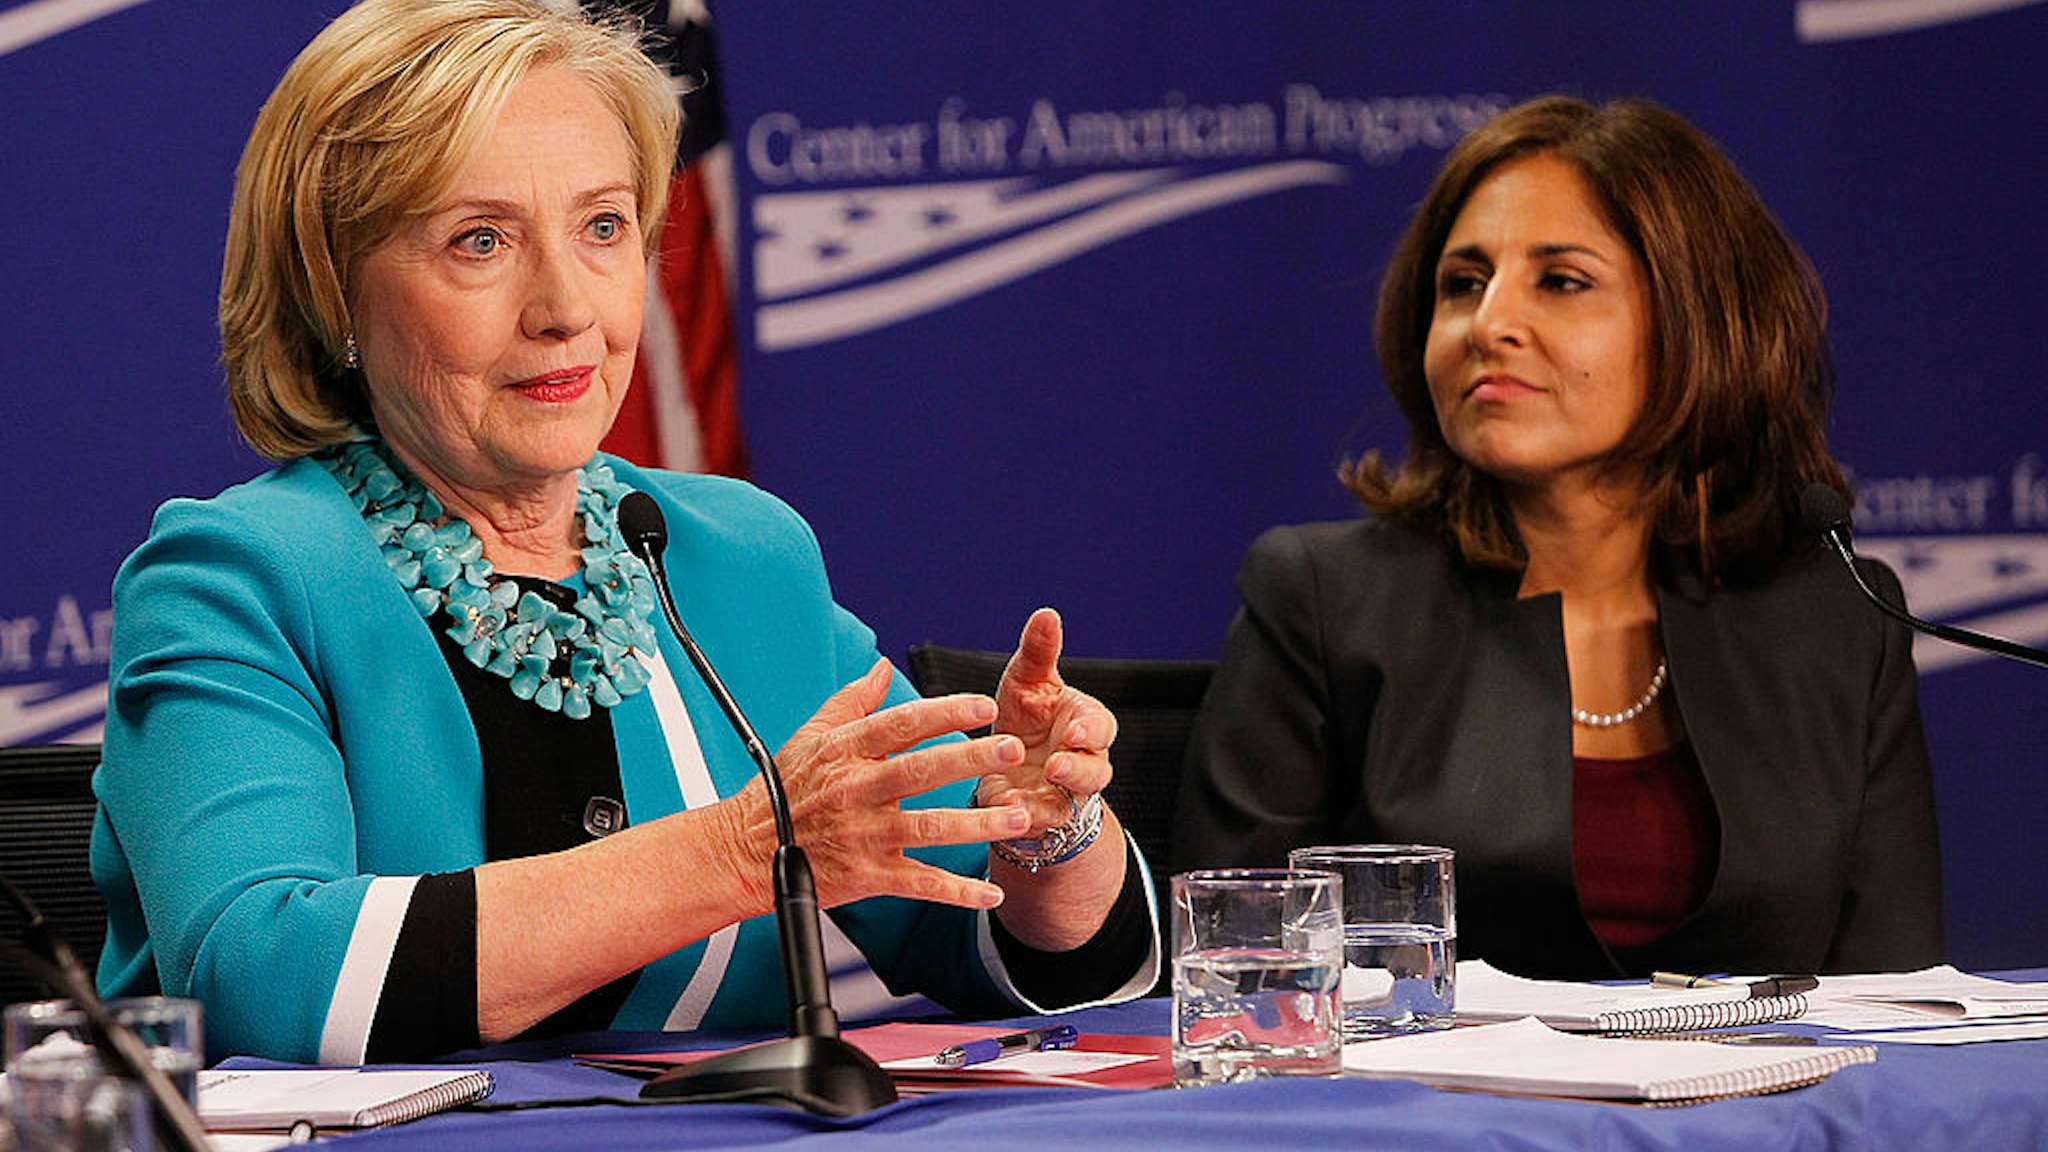 Secretary Hillary Clinton (L) and CAP President Neera Tanden attend the "Why Women's Economic Security Matters For All" panel discussion at The Center For American Progress on September 18, 2014 in Washington, DC.